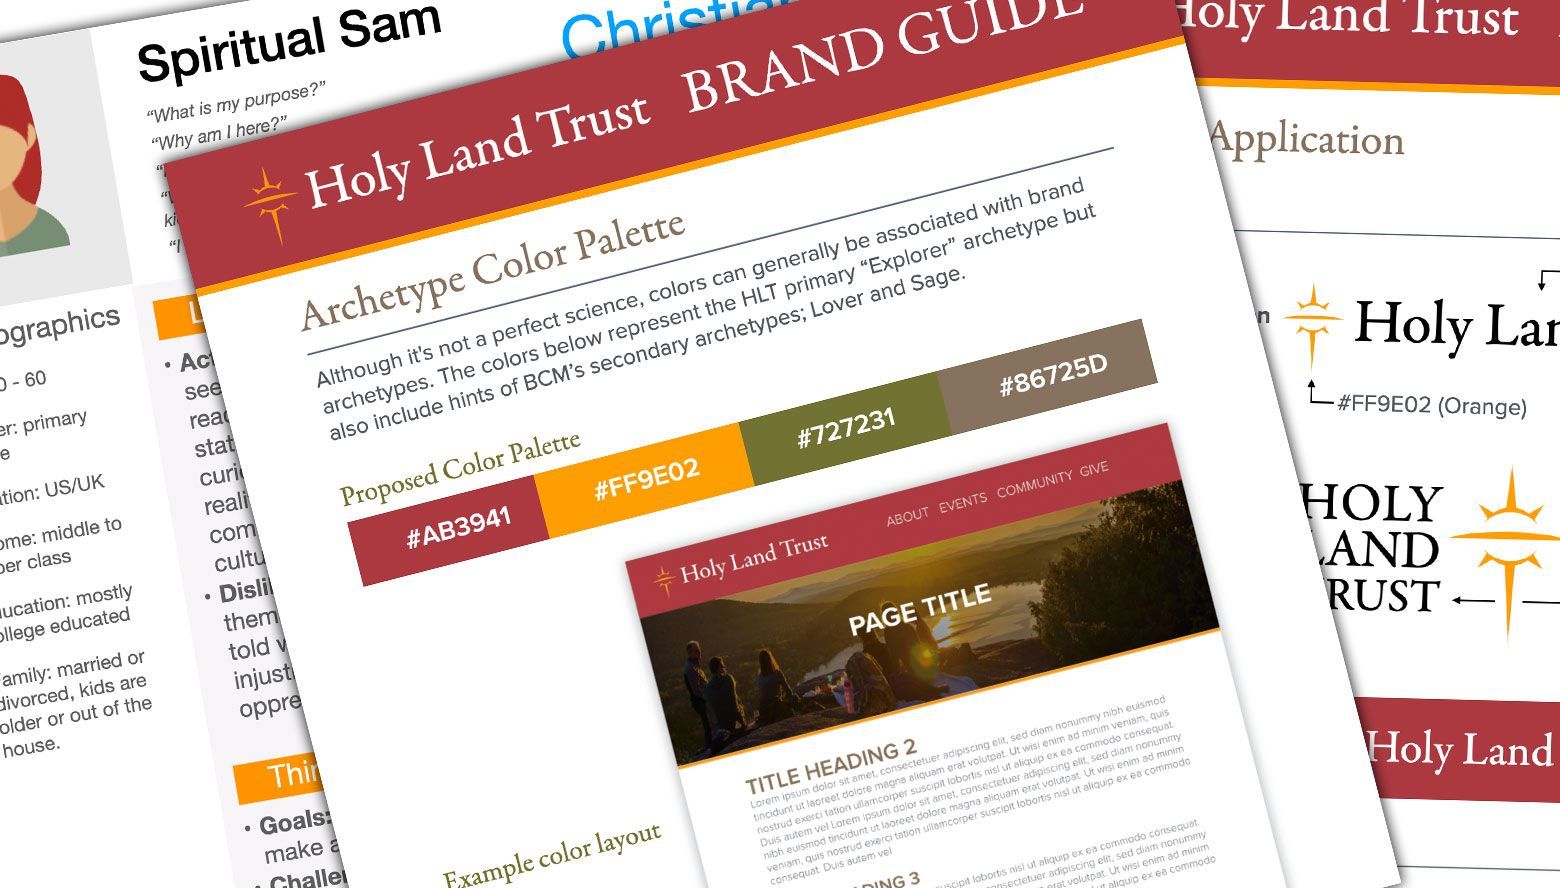 a holy land trust brand guide is laying on a table